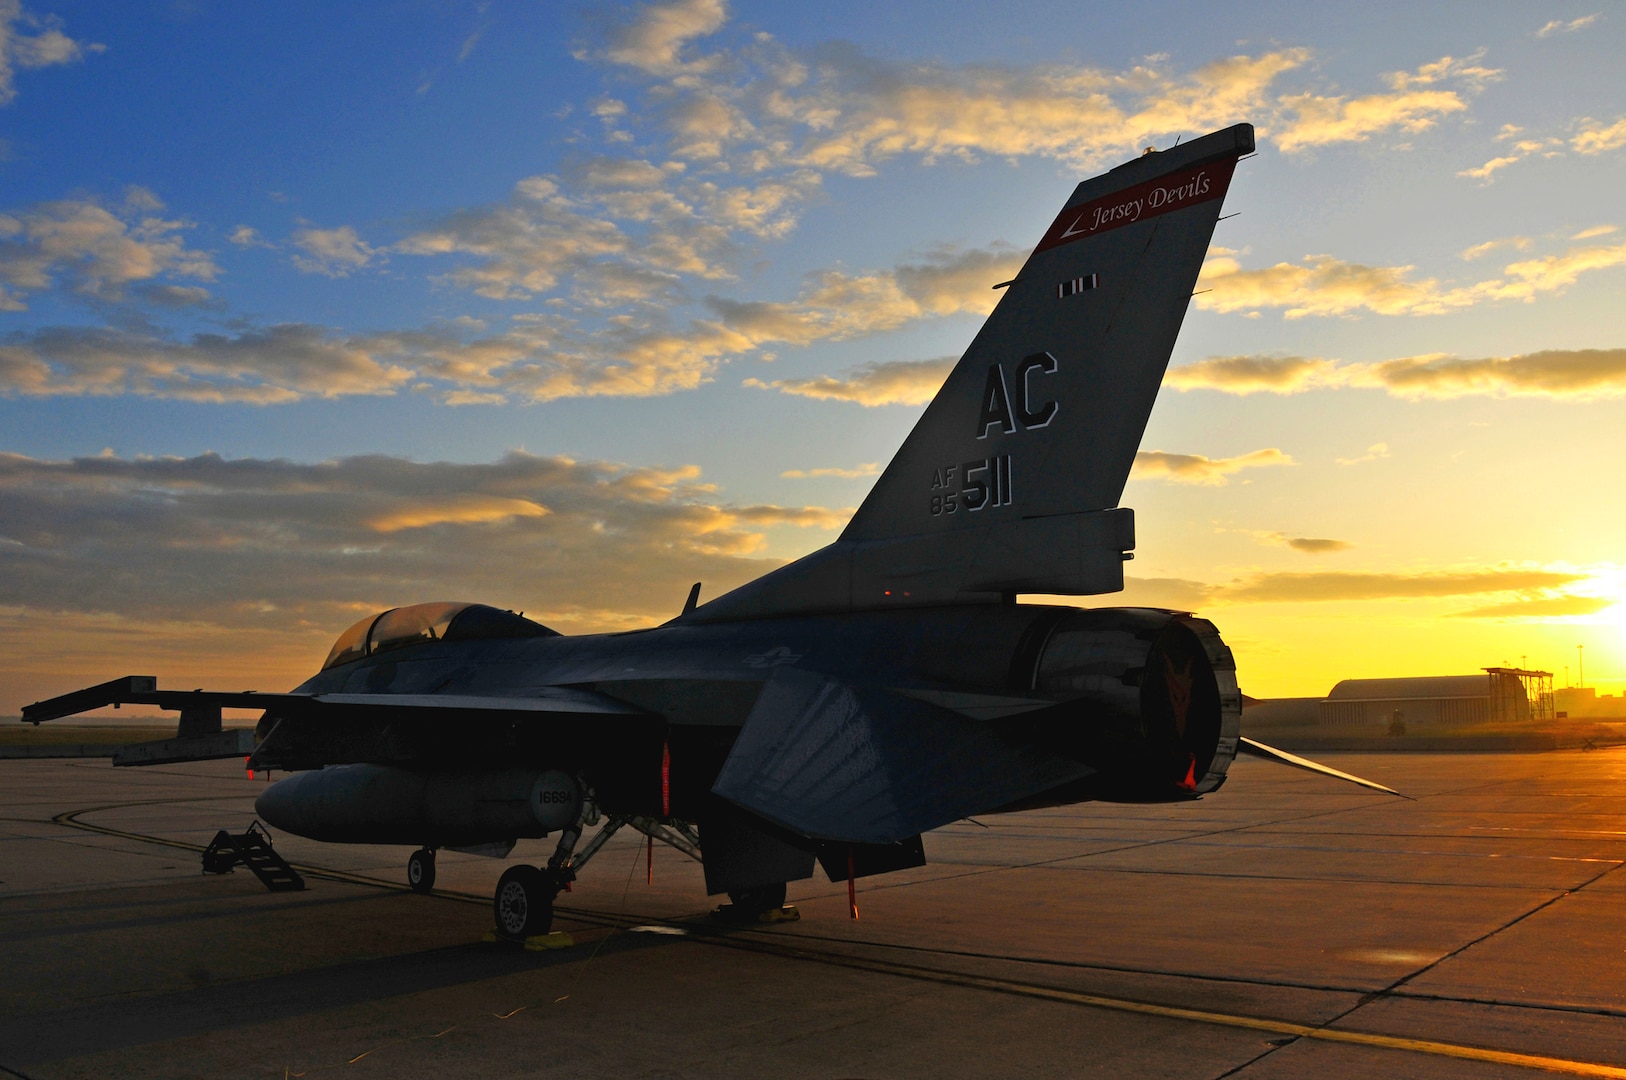 177th FIGHTER WING - AIR NATIONAL GUARD